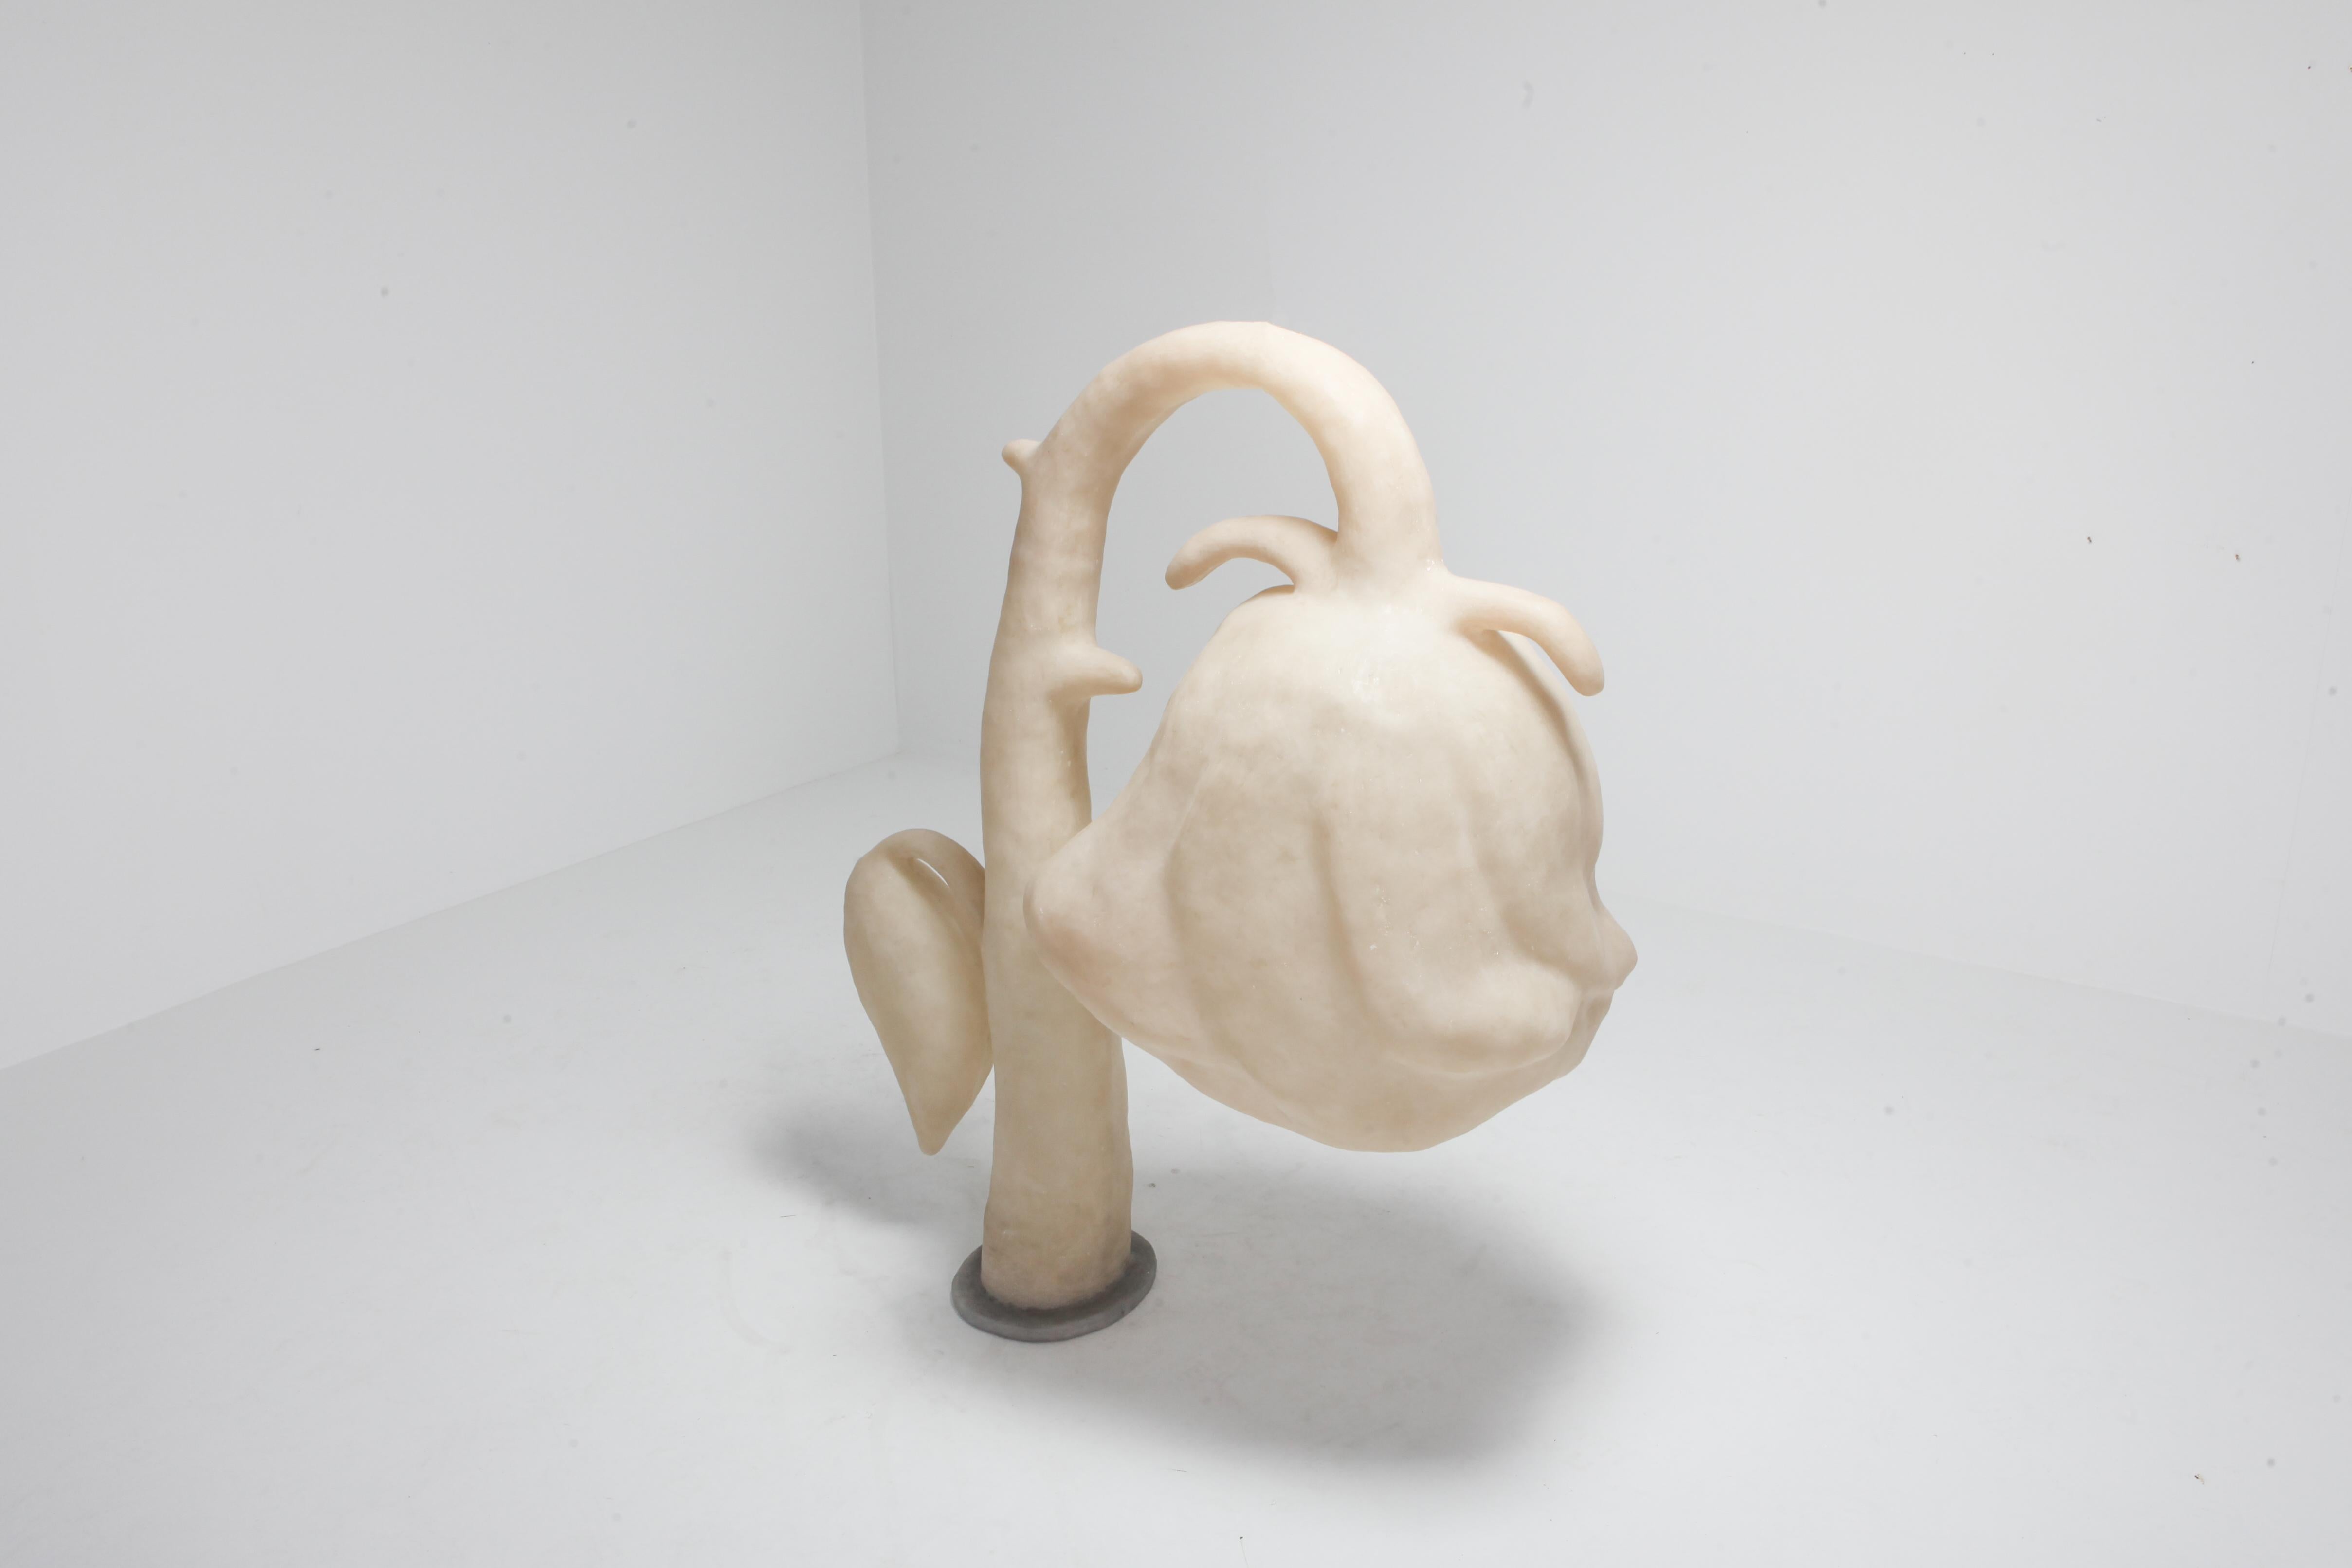 The Rose 
art sculpture by Daan Gielis 2019
currently on view at Everyday Gallery's show 'In real life'
'Mama, you don't need to cry'
2019
Polyester, metal.
 